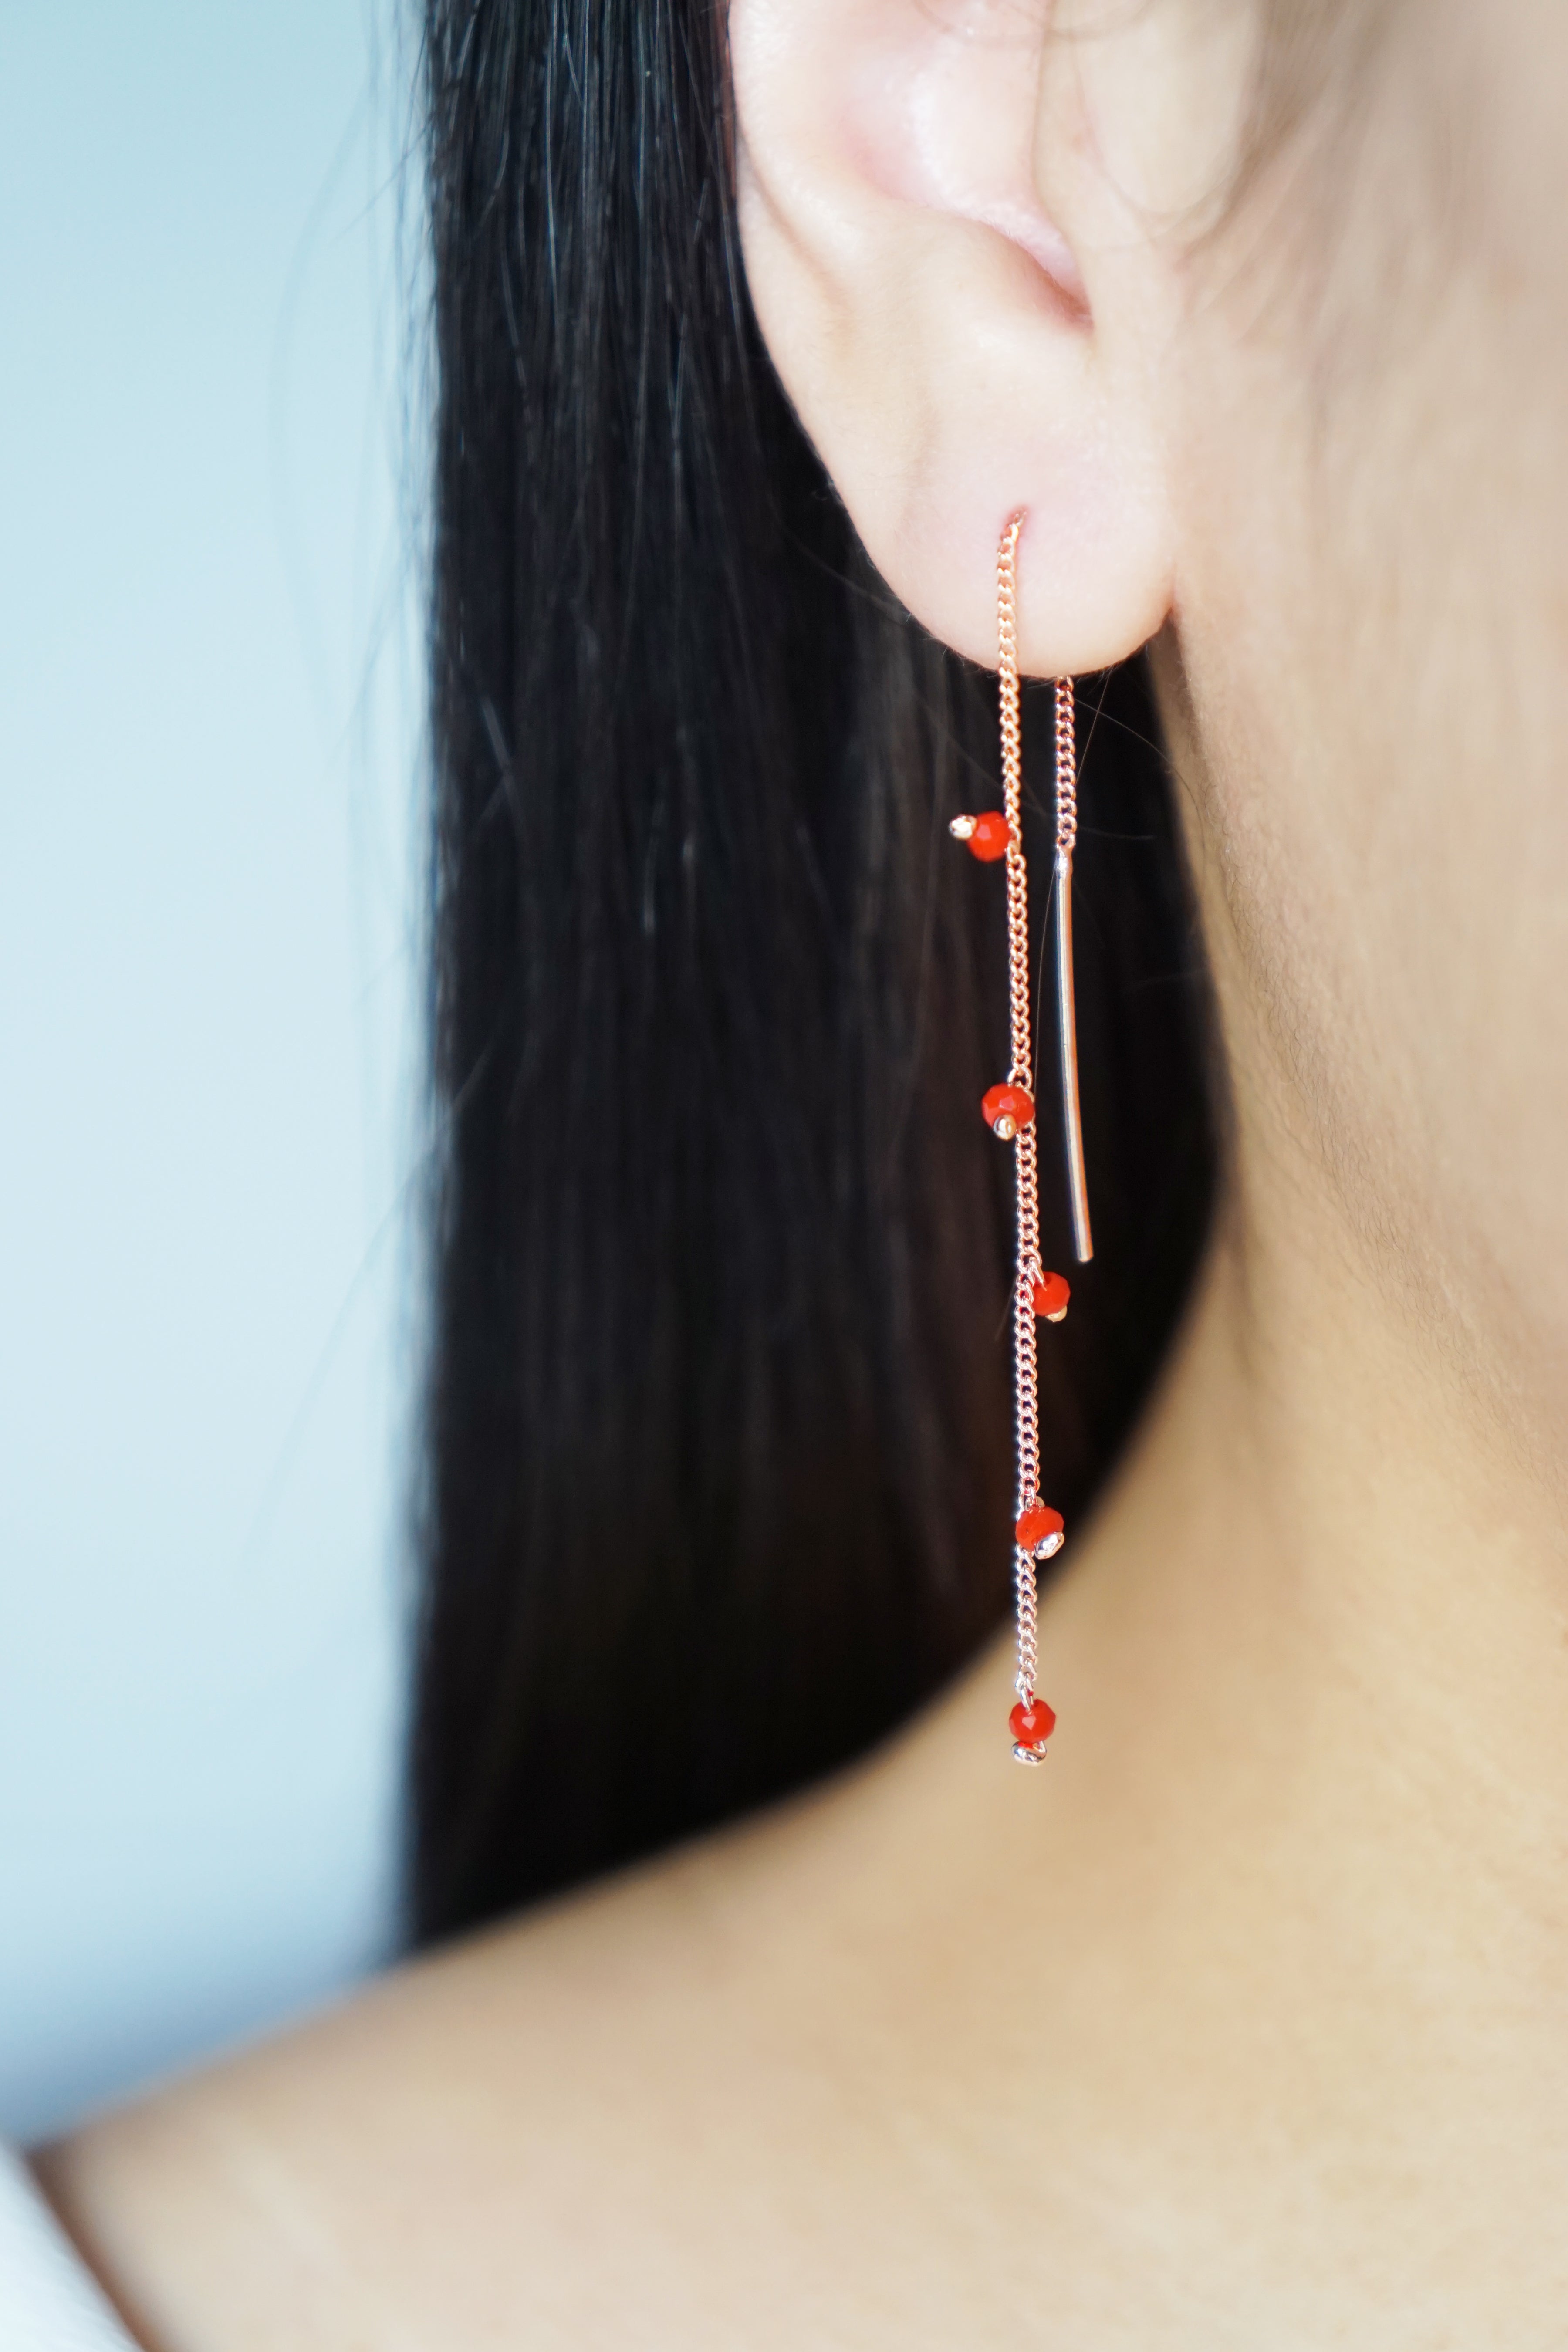 Wisteria Ear Threaders in Rose Gold - Red